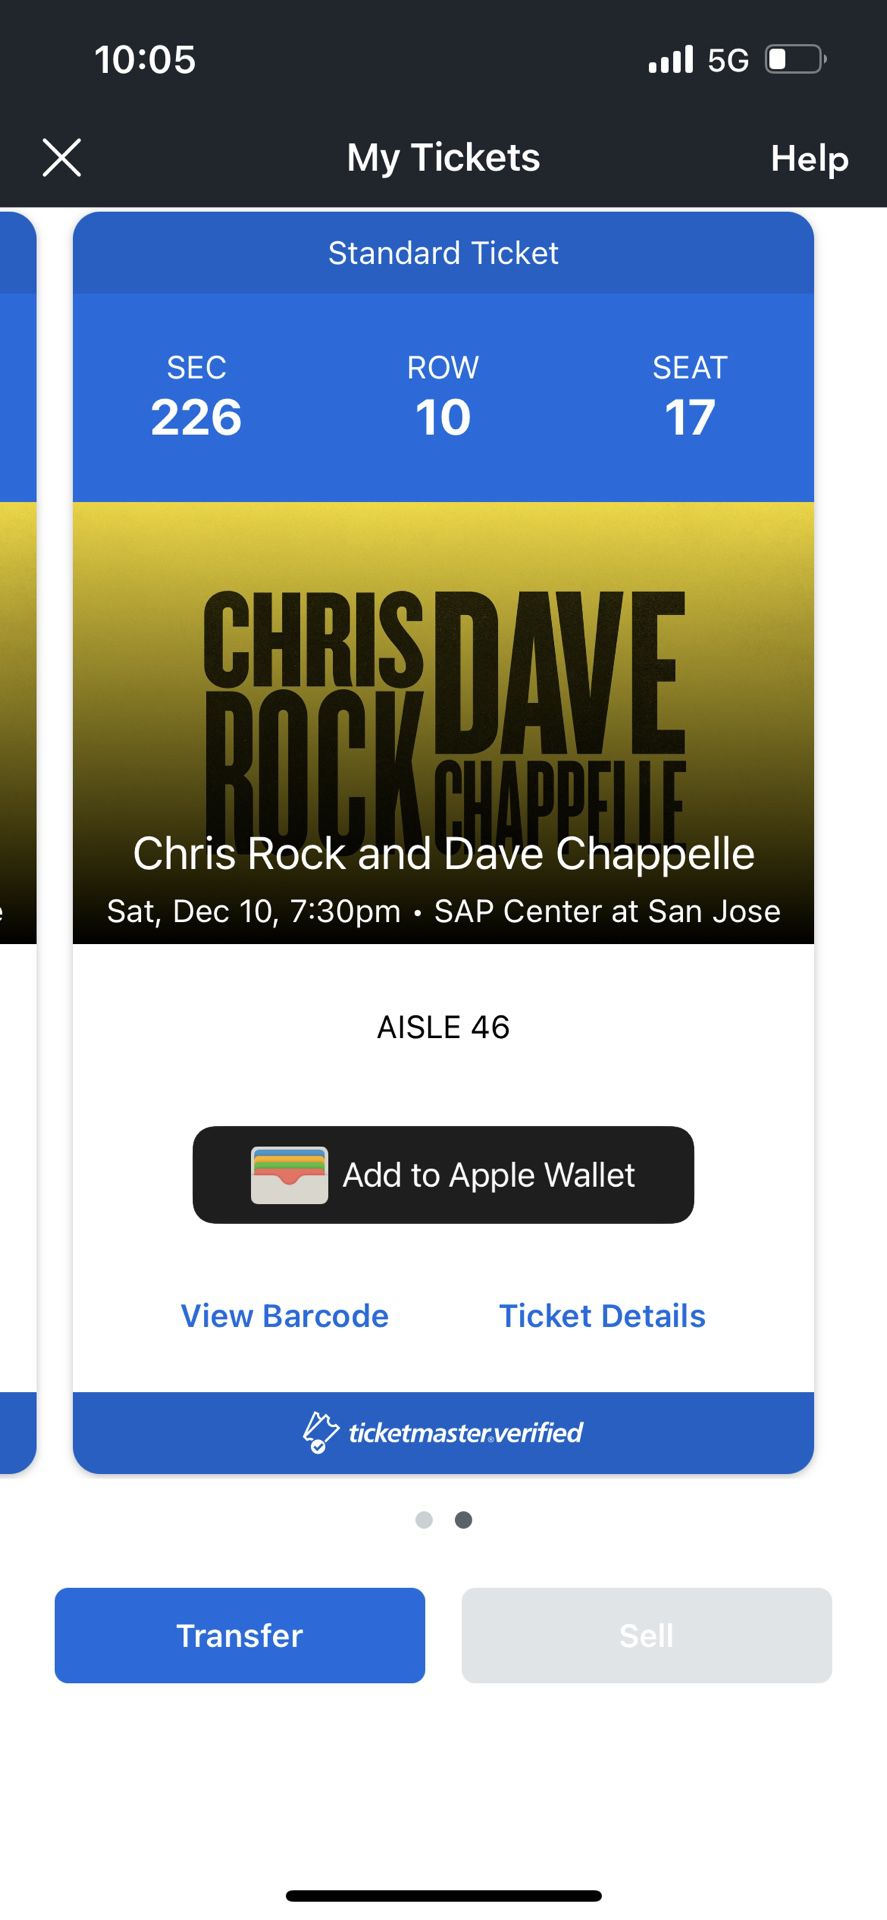 Chris Rock And Dave Chappelle Comedy tour